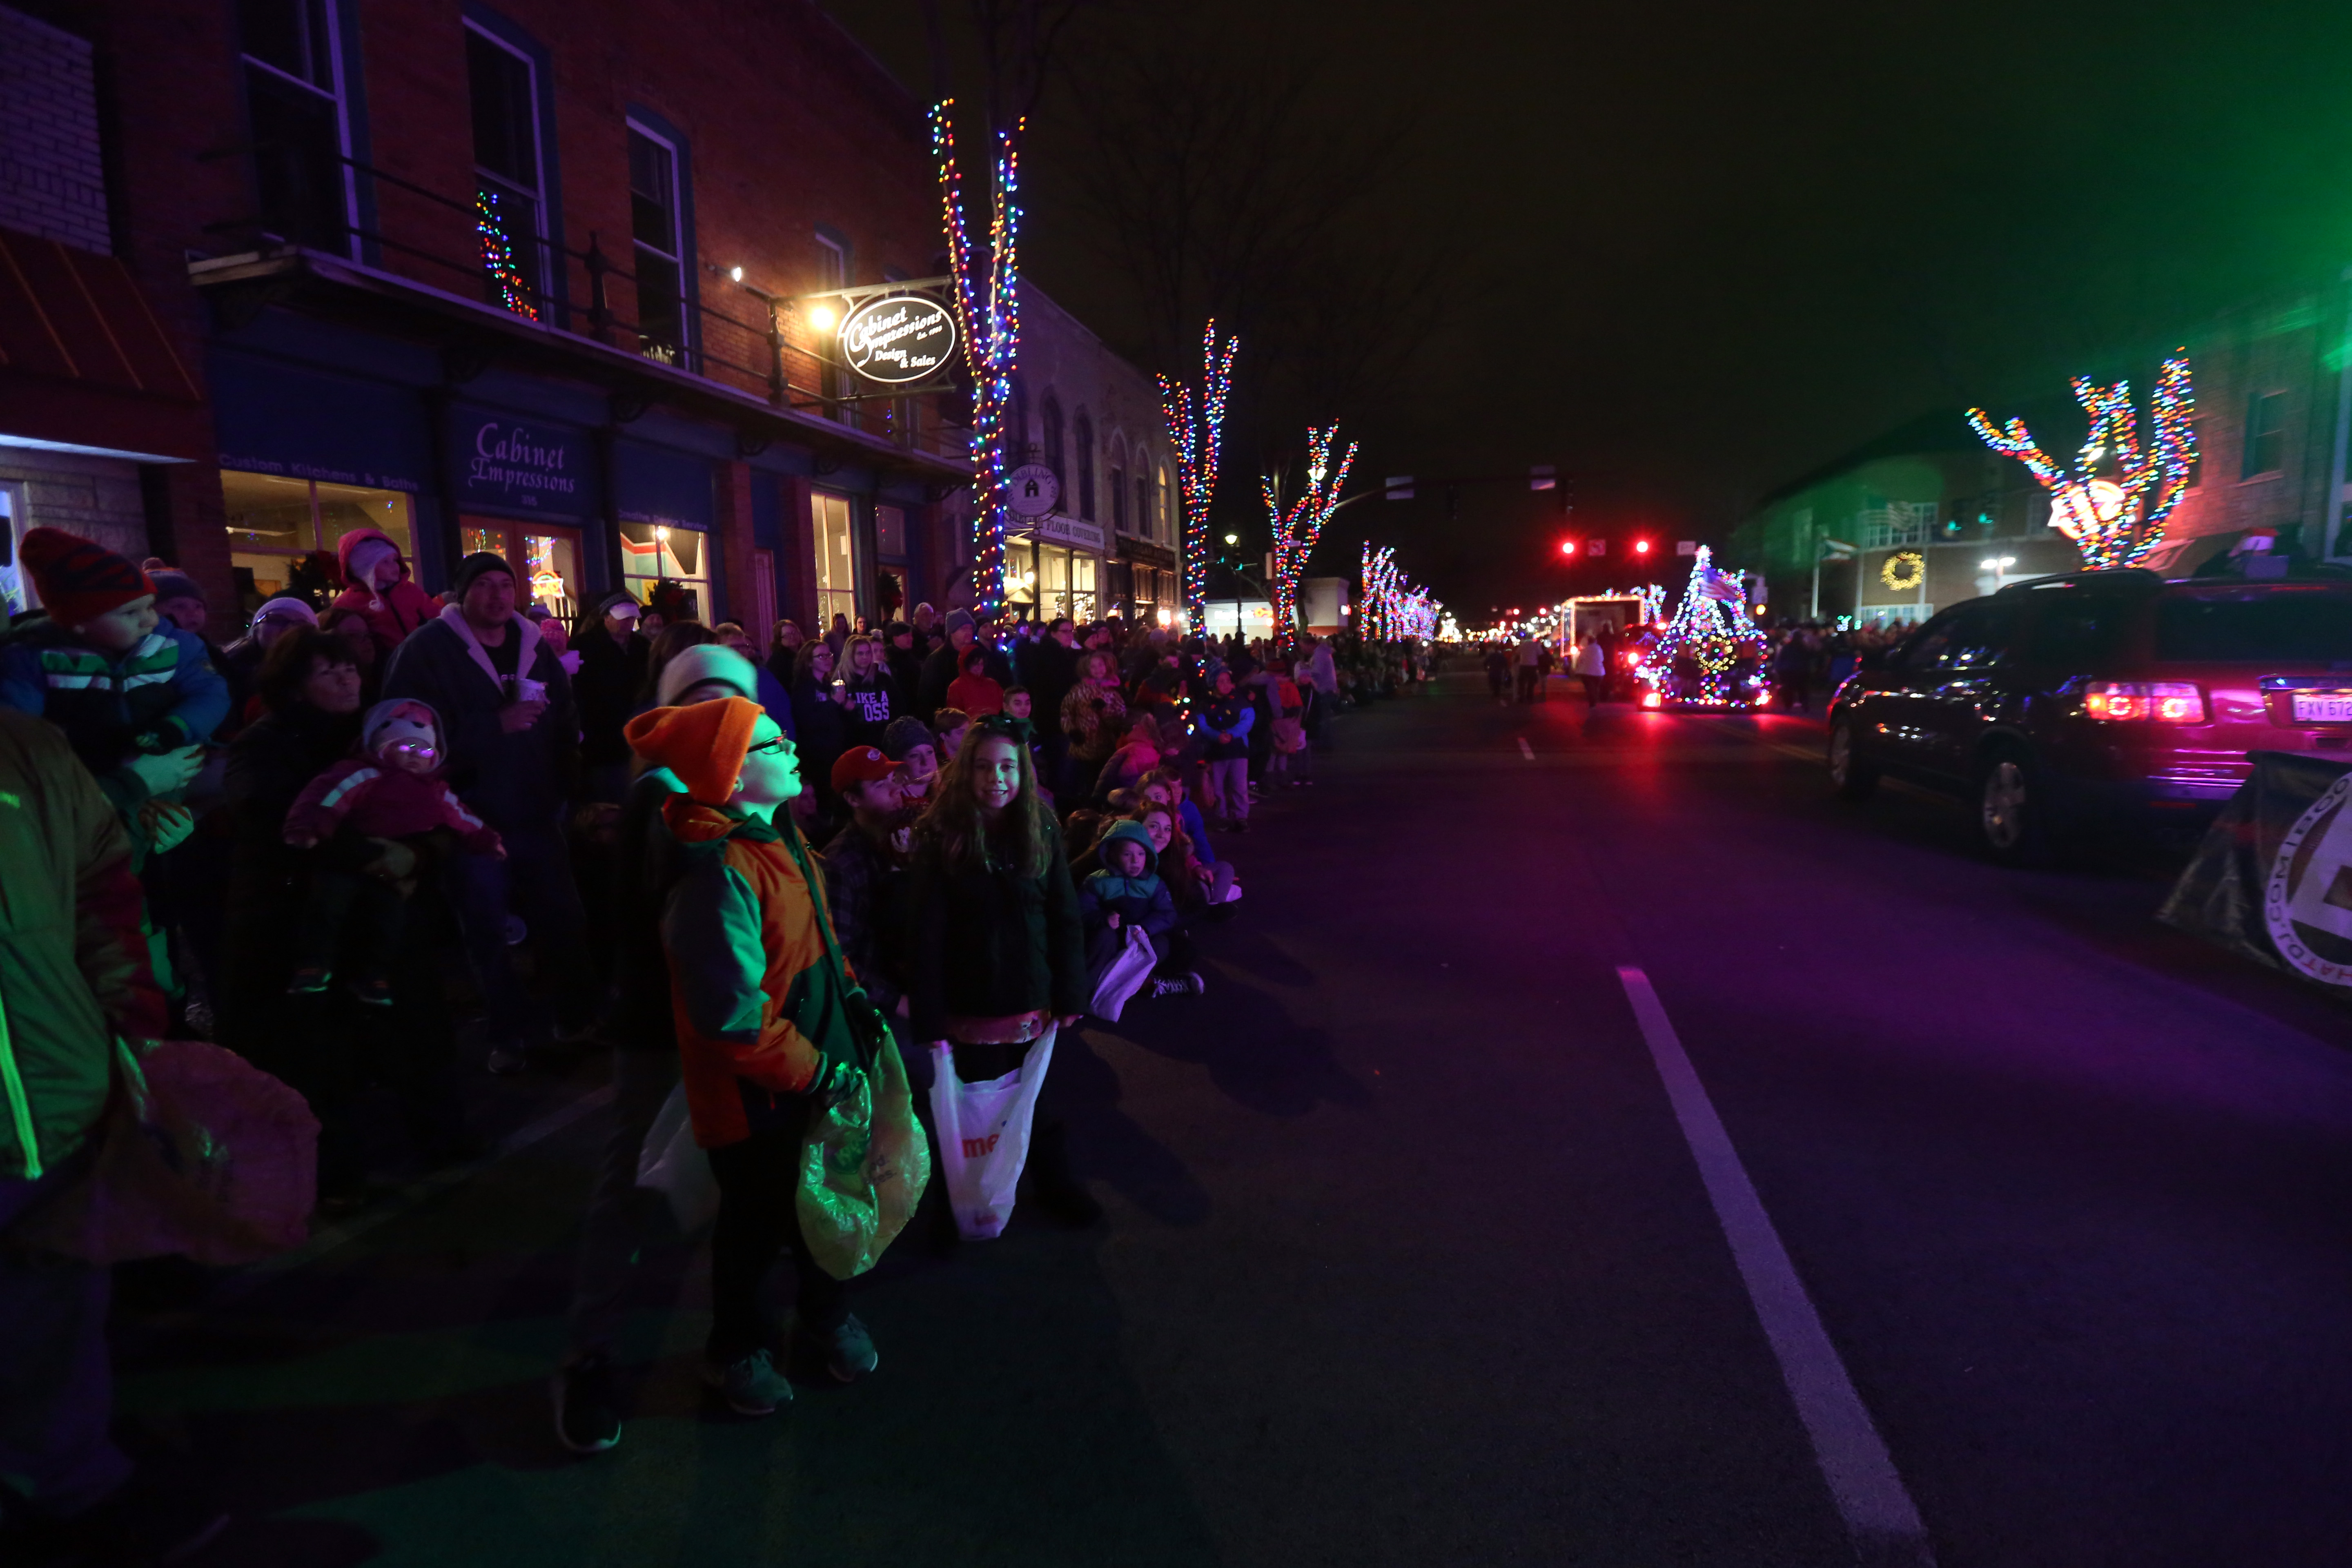 GALLERY Maumee lights up the night The Blade